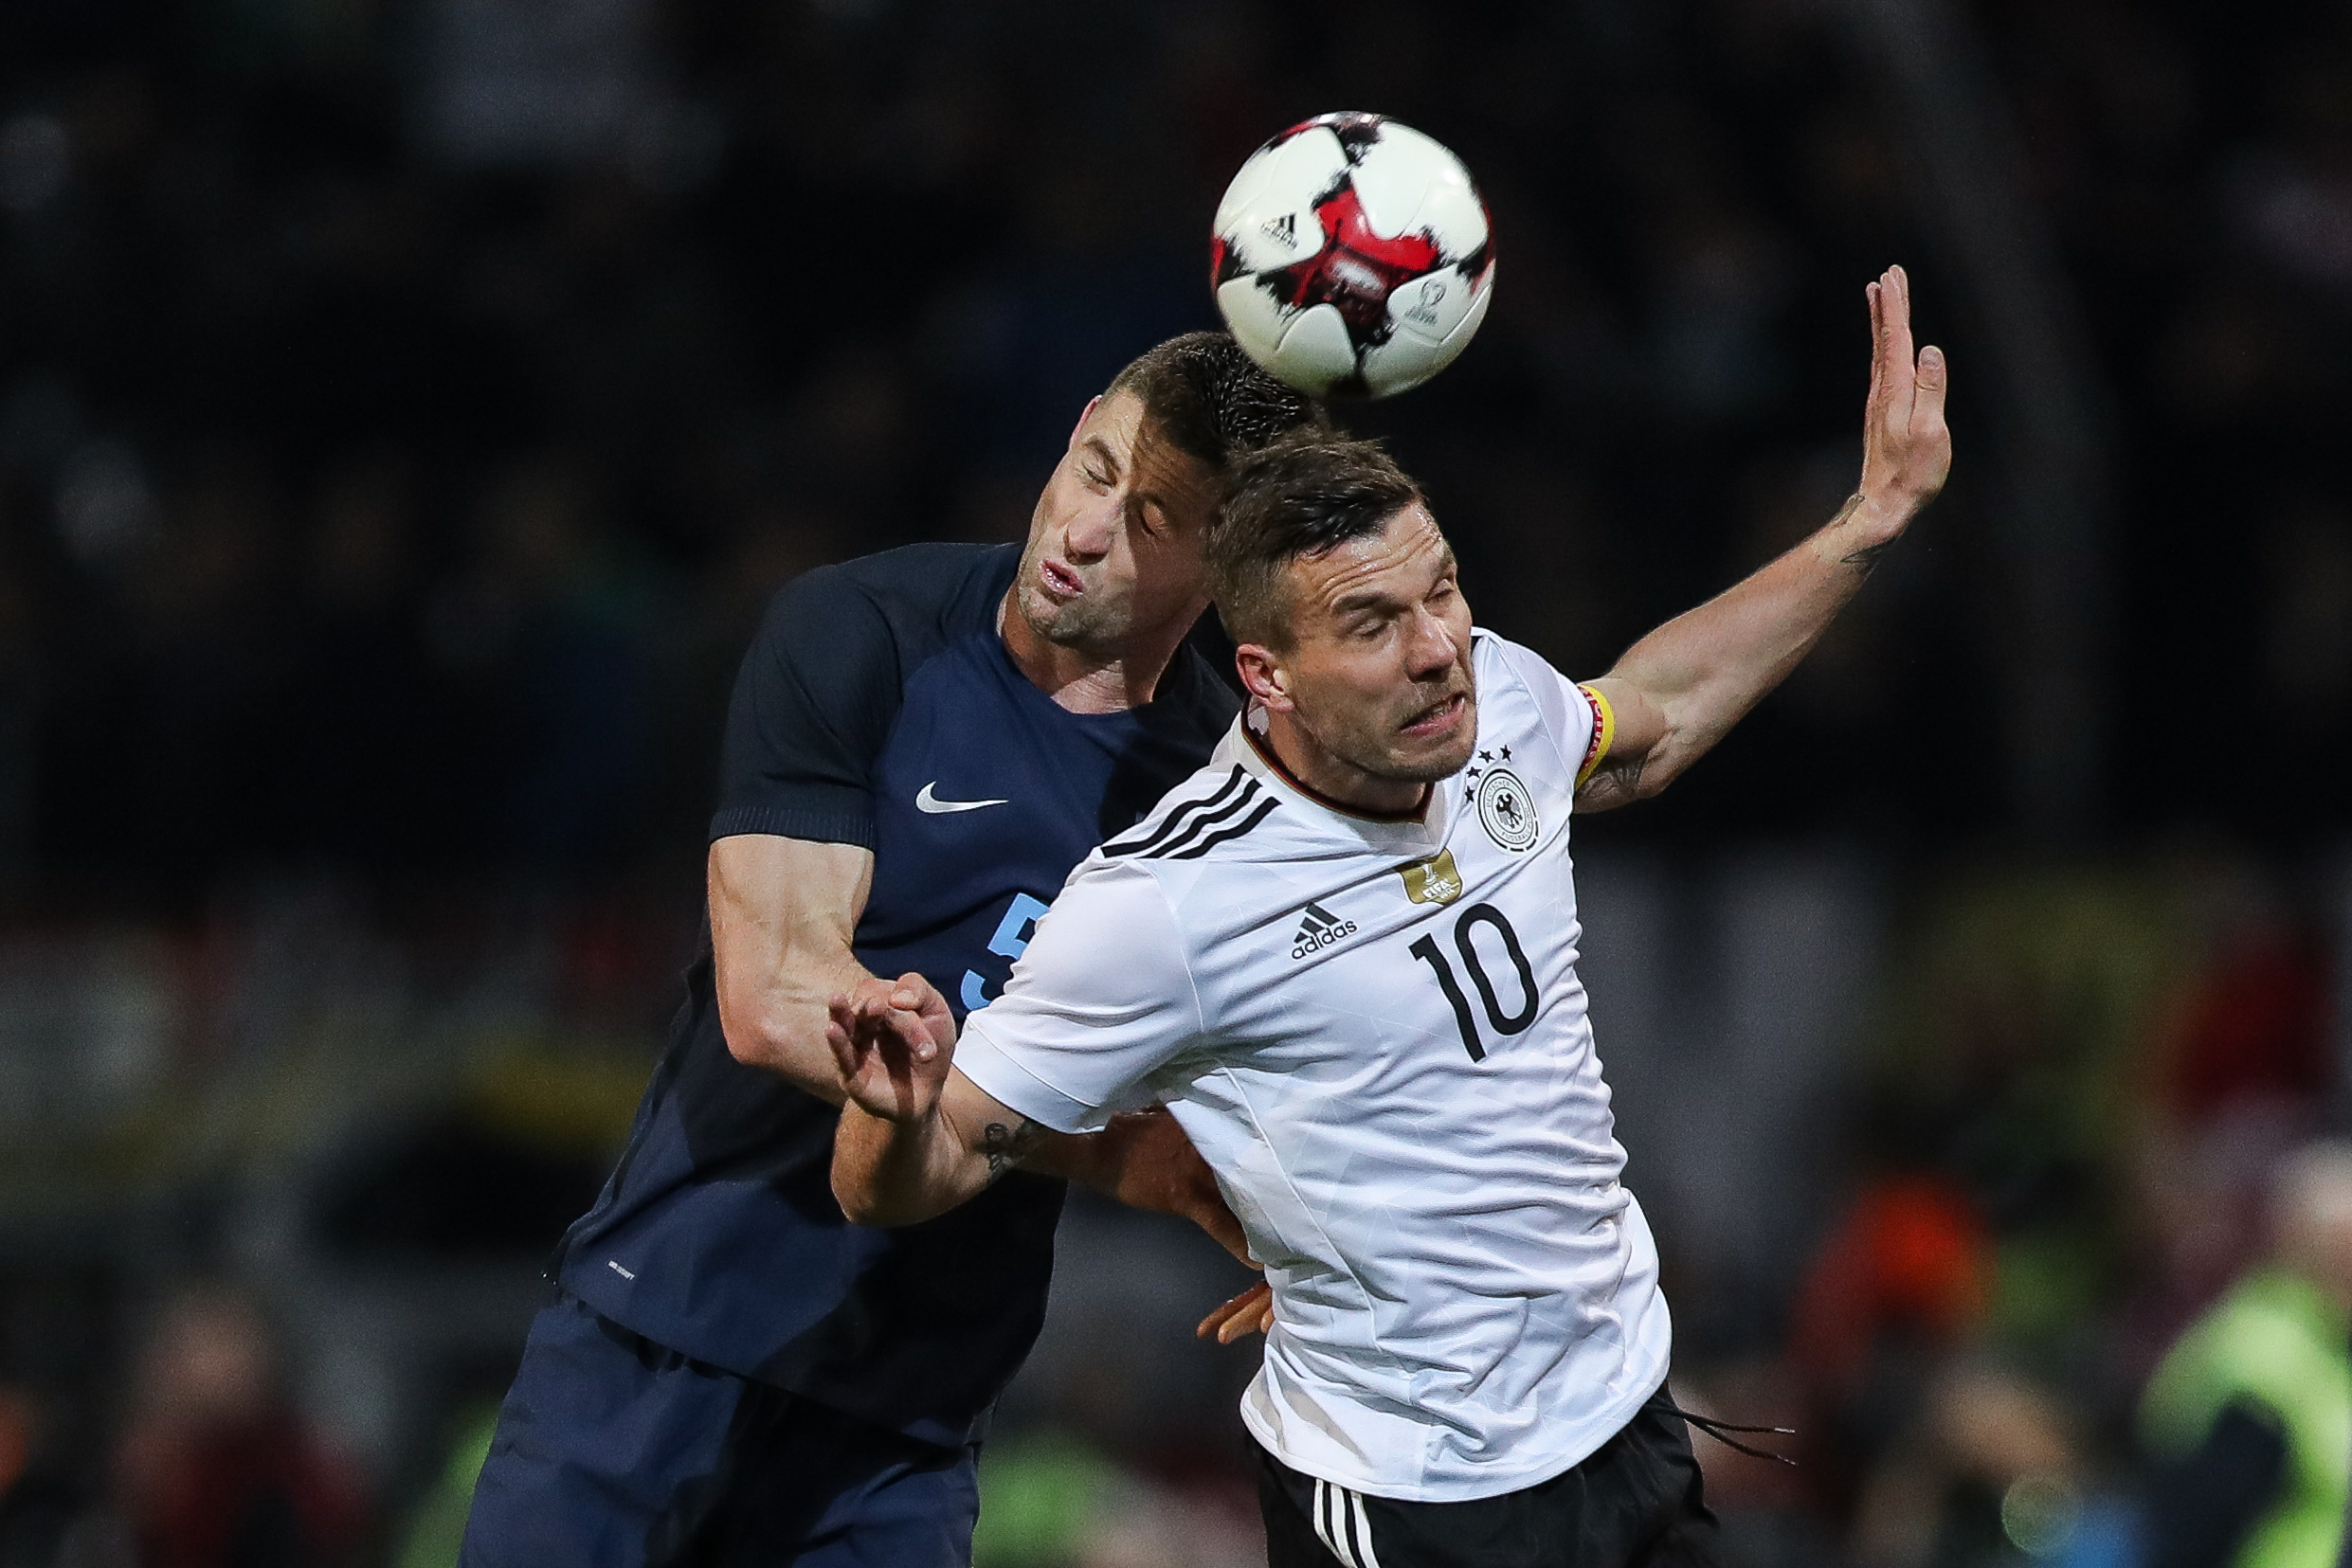 DORTMUND, GERMANY - MARCH 22:  Lukas Podolski of Germany and Gary Cahill of England battle for the ball during the international friendly match between Germany and England at Signal Iduna Park on March 22, 2017 in Dortmund, Germany. (Photo by Maja Hitij/Bongarts/Getty Images)